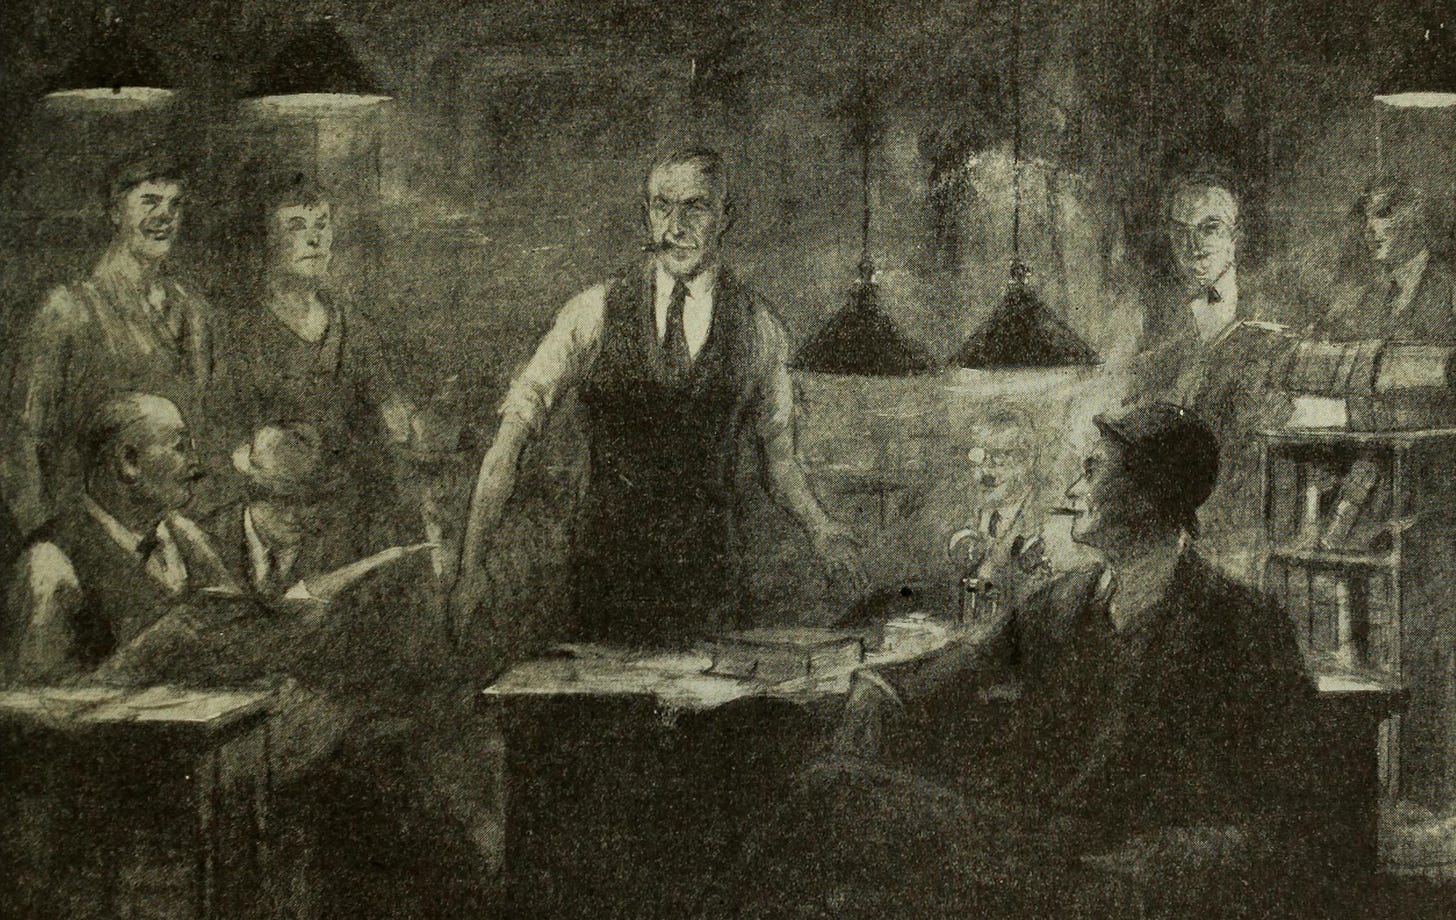 Illustration of a newspaper room by Edward Ryan (1920)